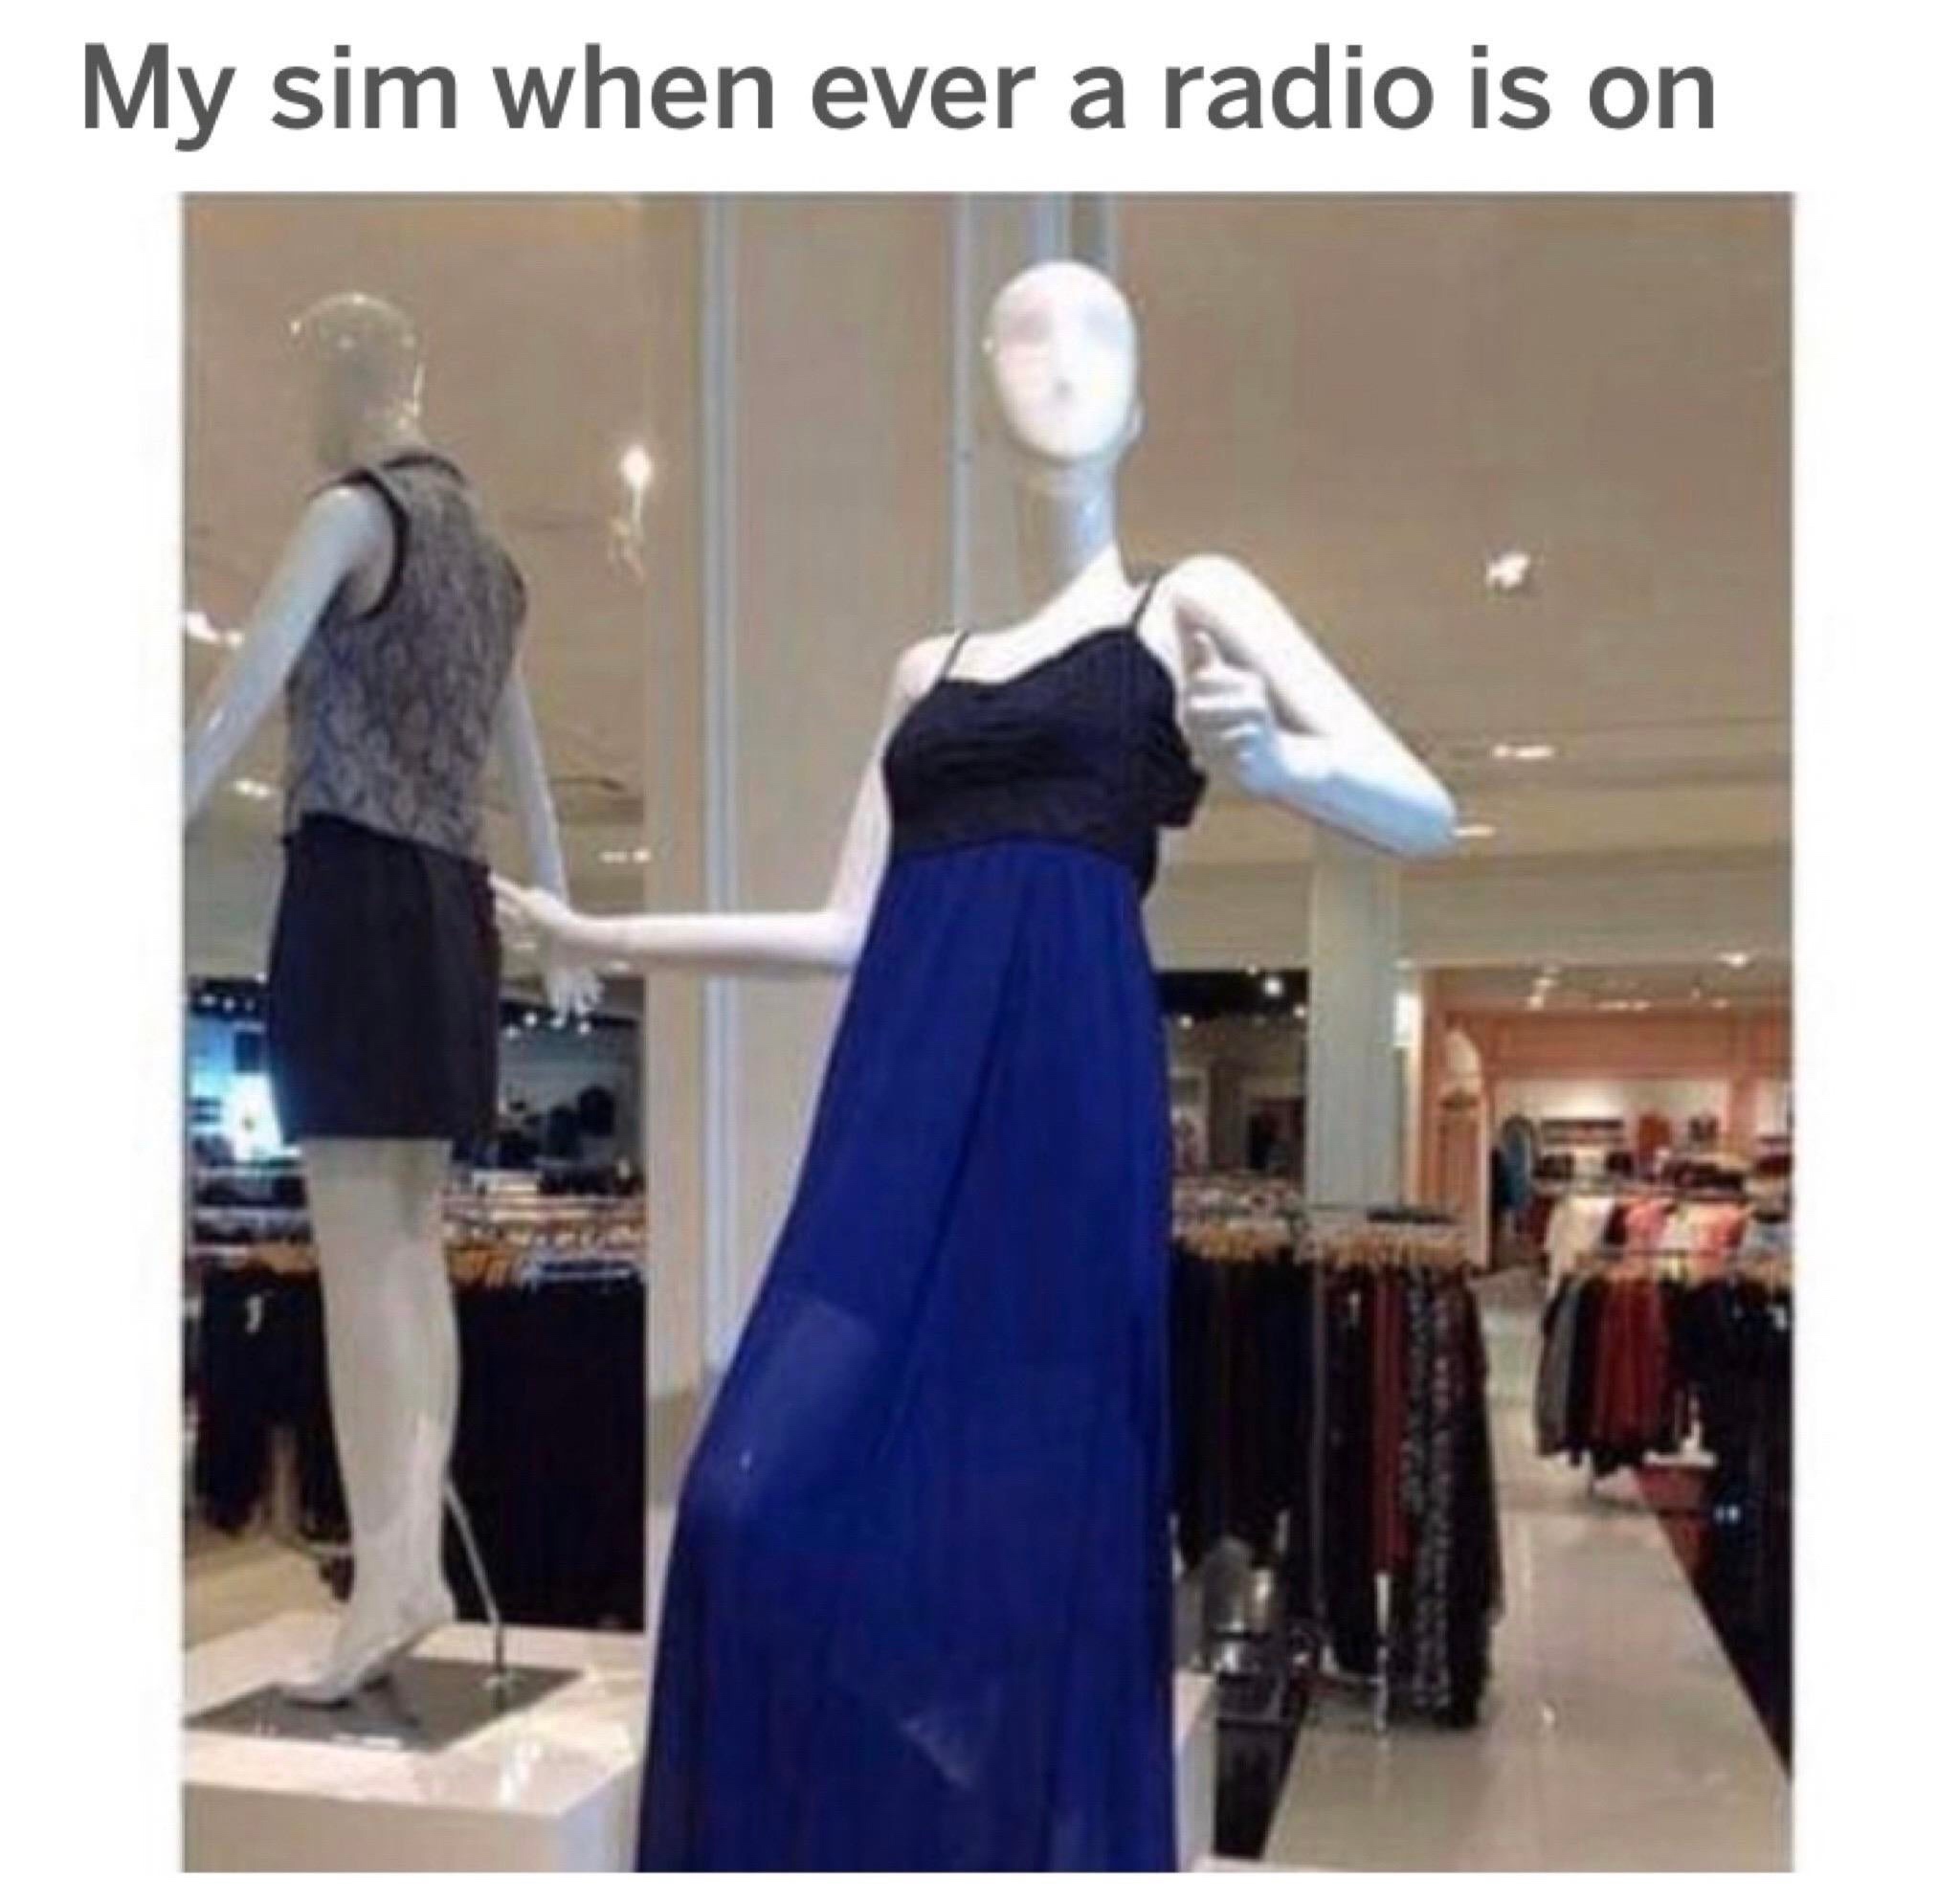 snap your fingers do your step - My sim when ever a radio is on